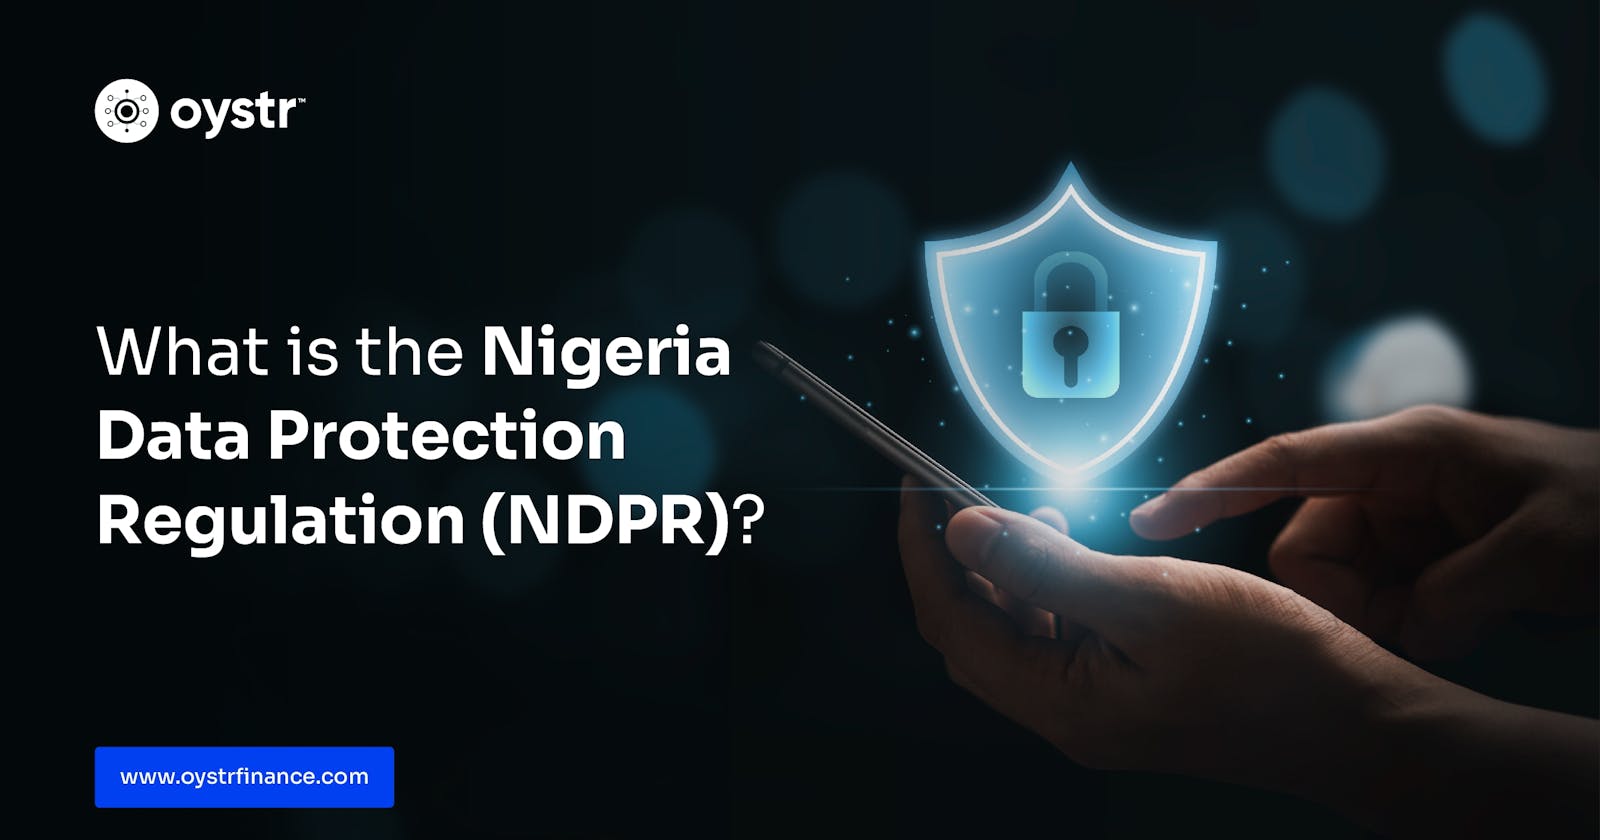 What is the Nigeria Data Protection Regulation (NDPR)?